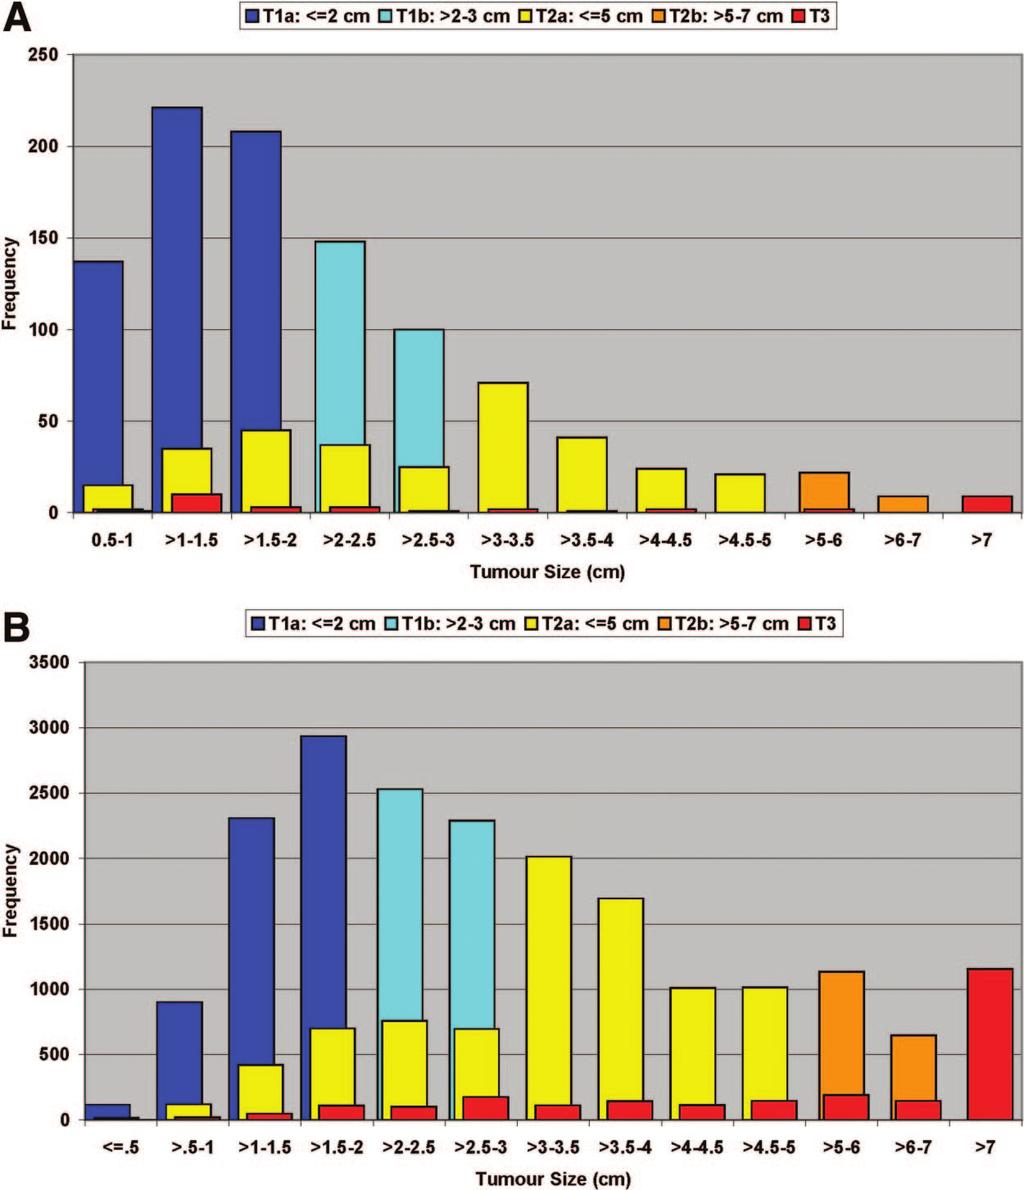 Journal of Thoracic Oncology Volume 3, Number 11, November 2008 TNM Classification in Pulmonary Carcinoid Tumors FIGURE 1. Histograms of tumor size, SEER surgically treated cases diagnosed 1990 2002.